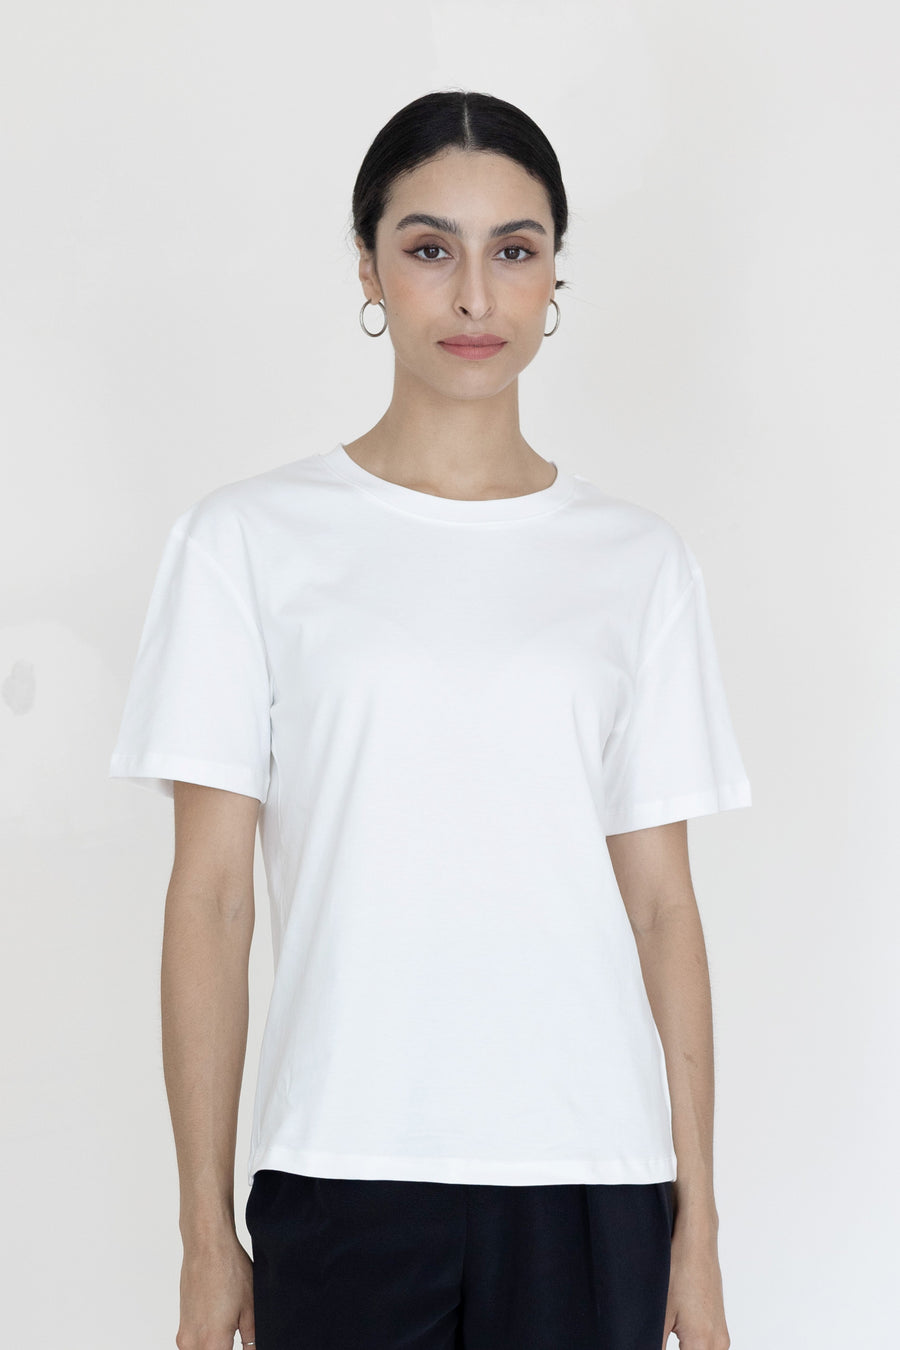 The Basic Everyday Tee Loose Fit White